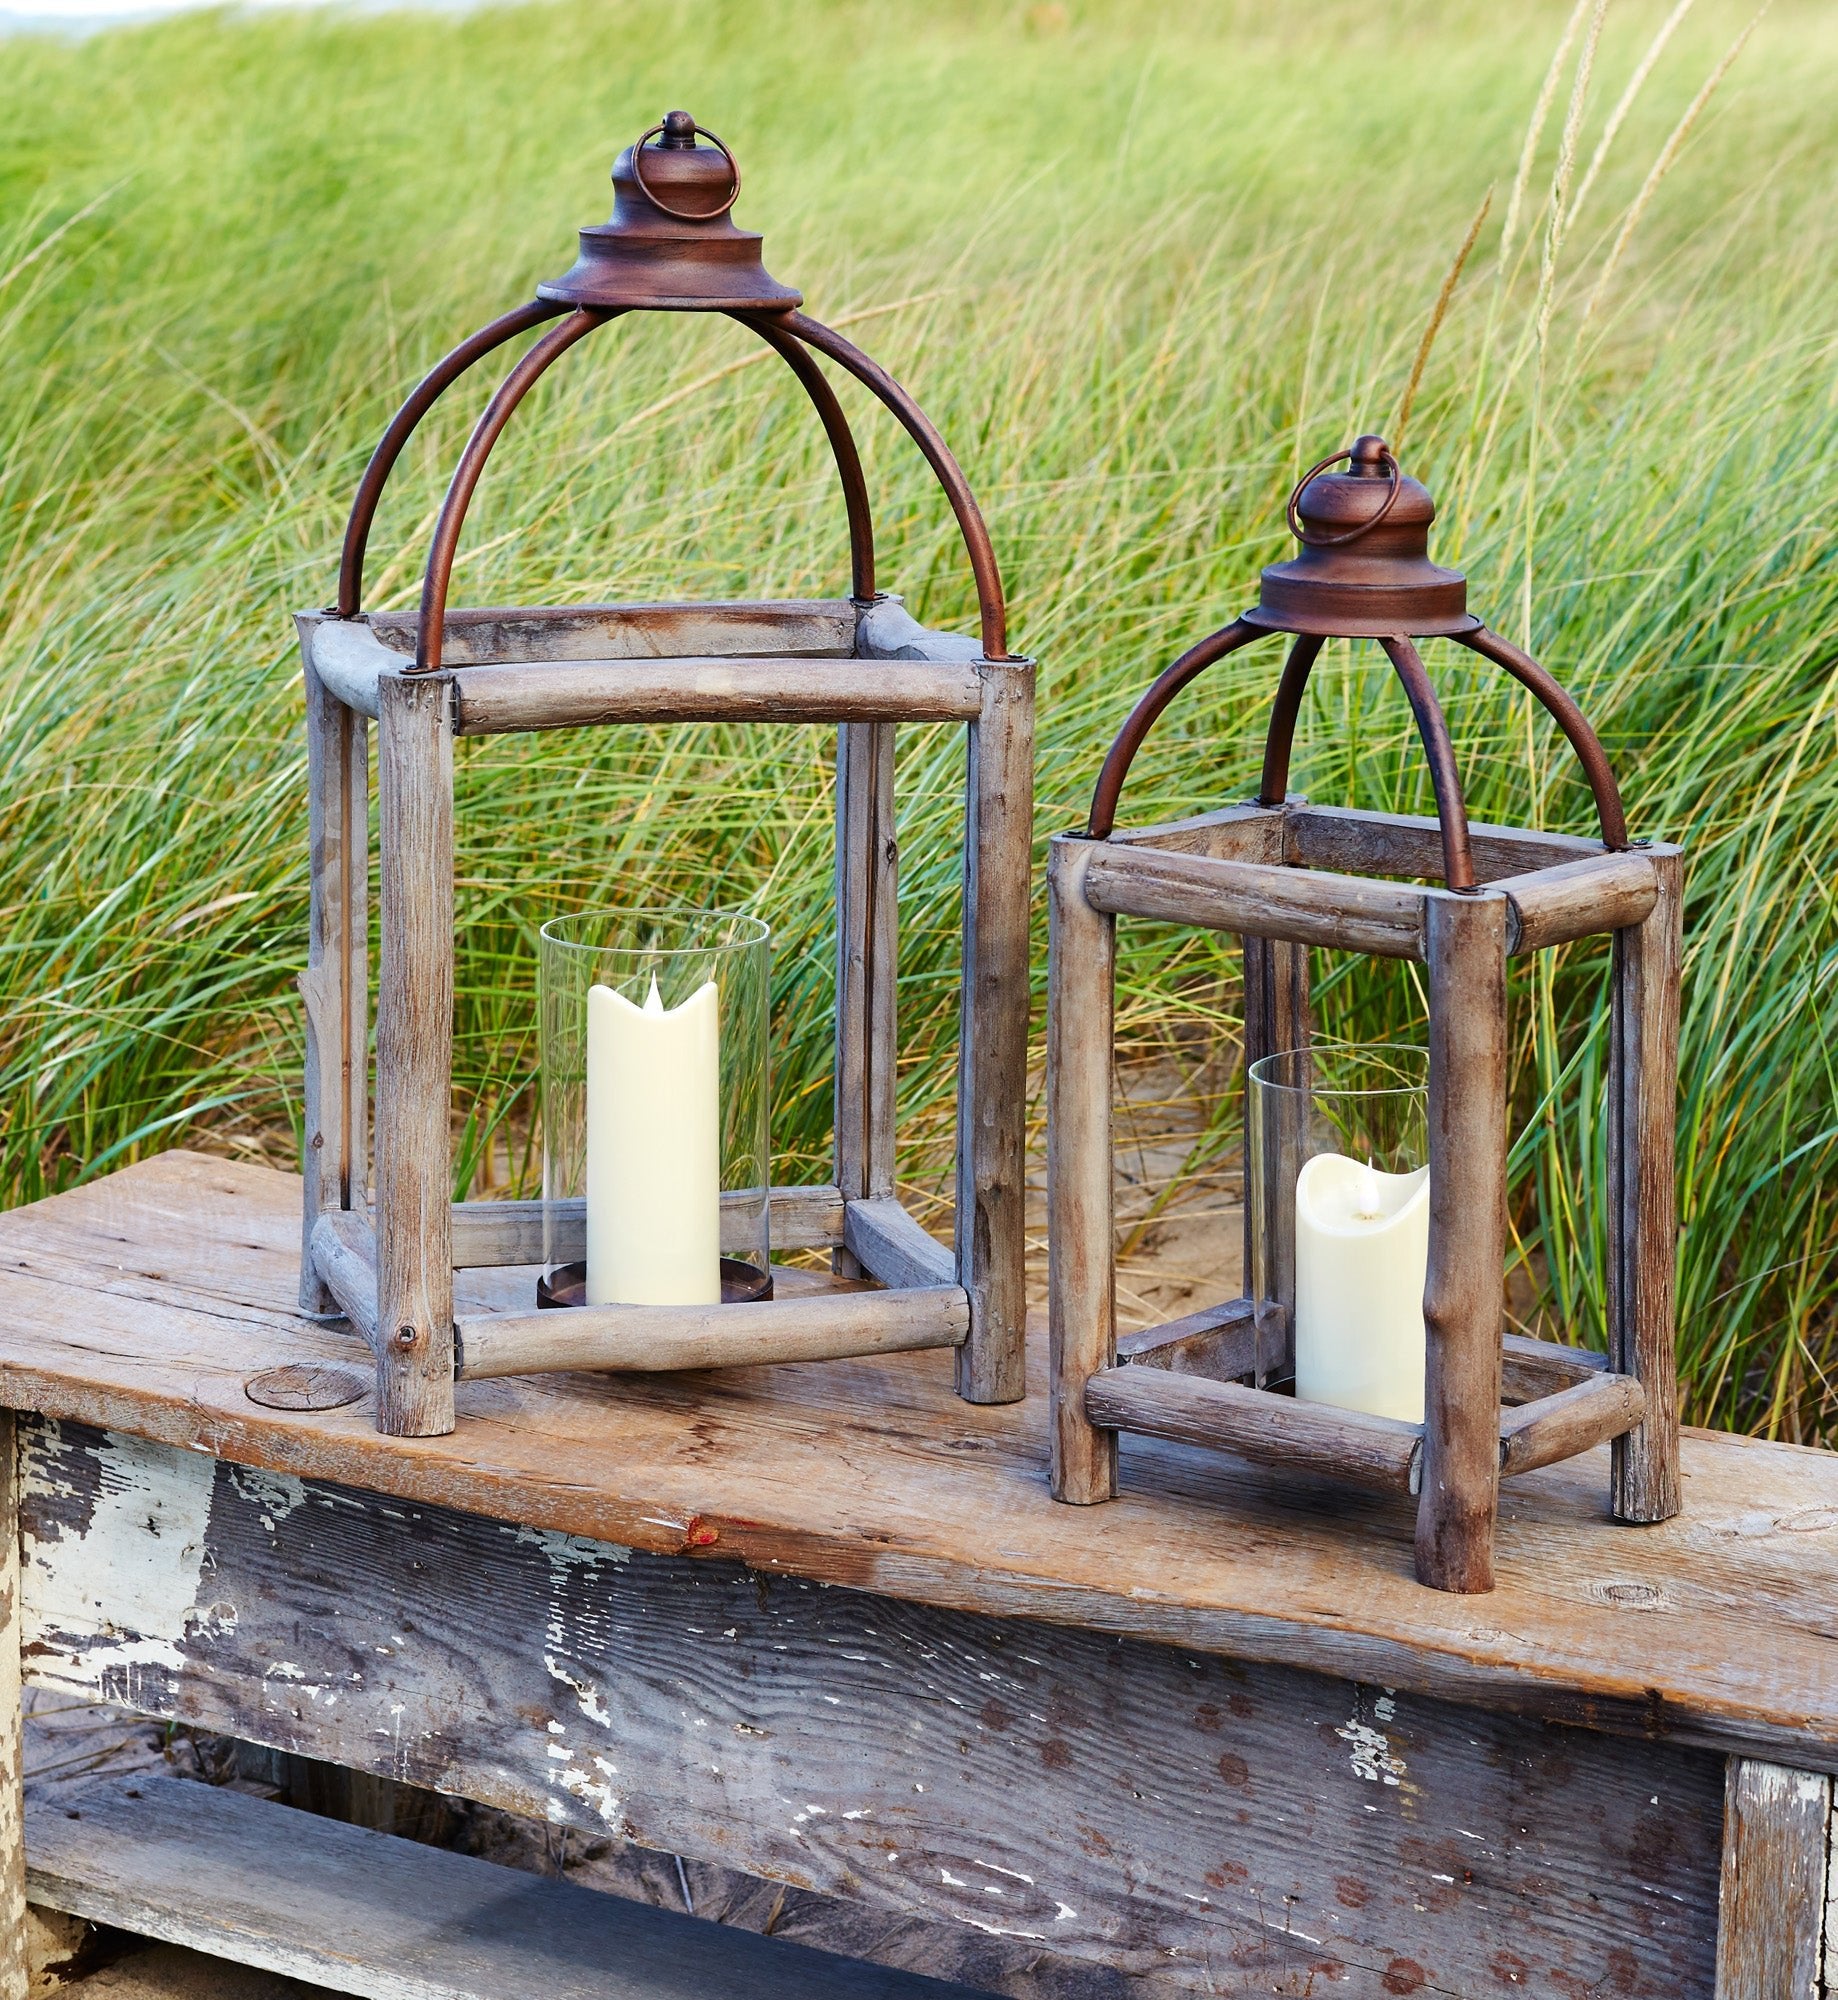 Set Of Two Gray Flameless Floor Lantern Candle Holder - Tuesday Morning-Candle Holders